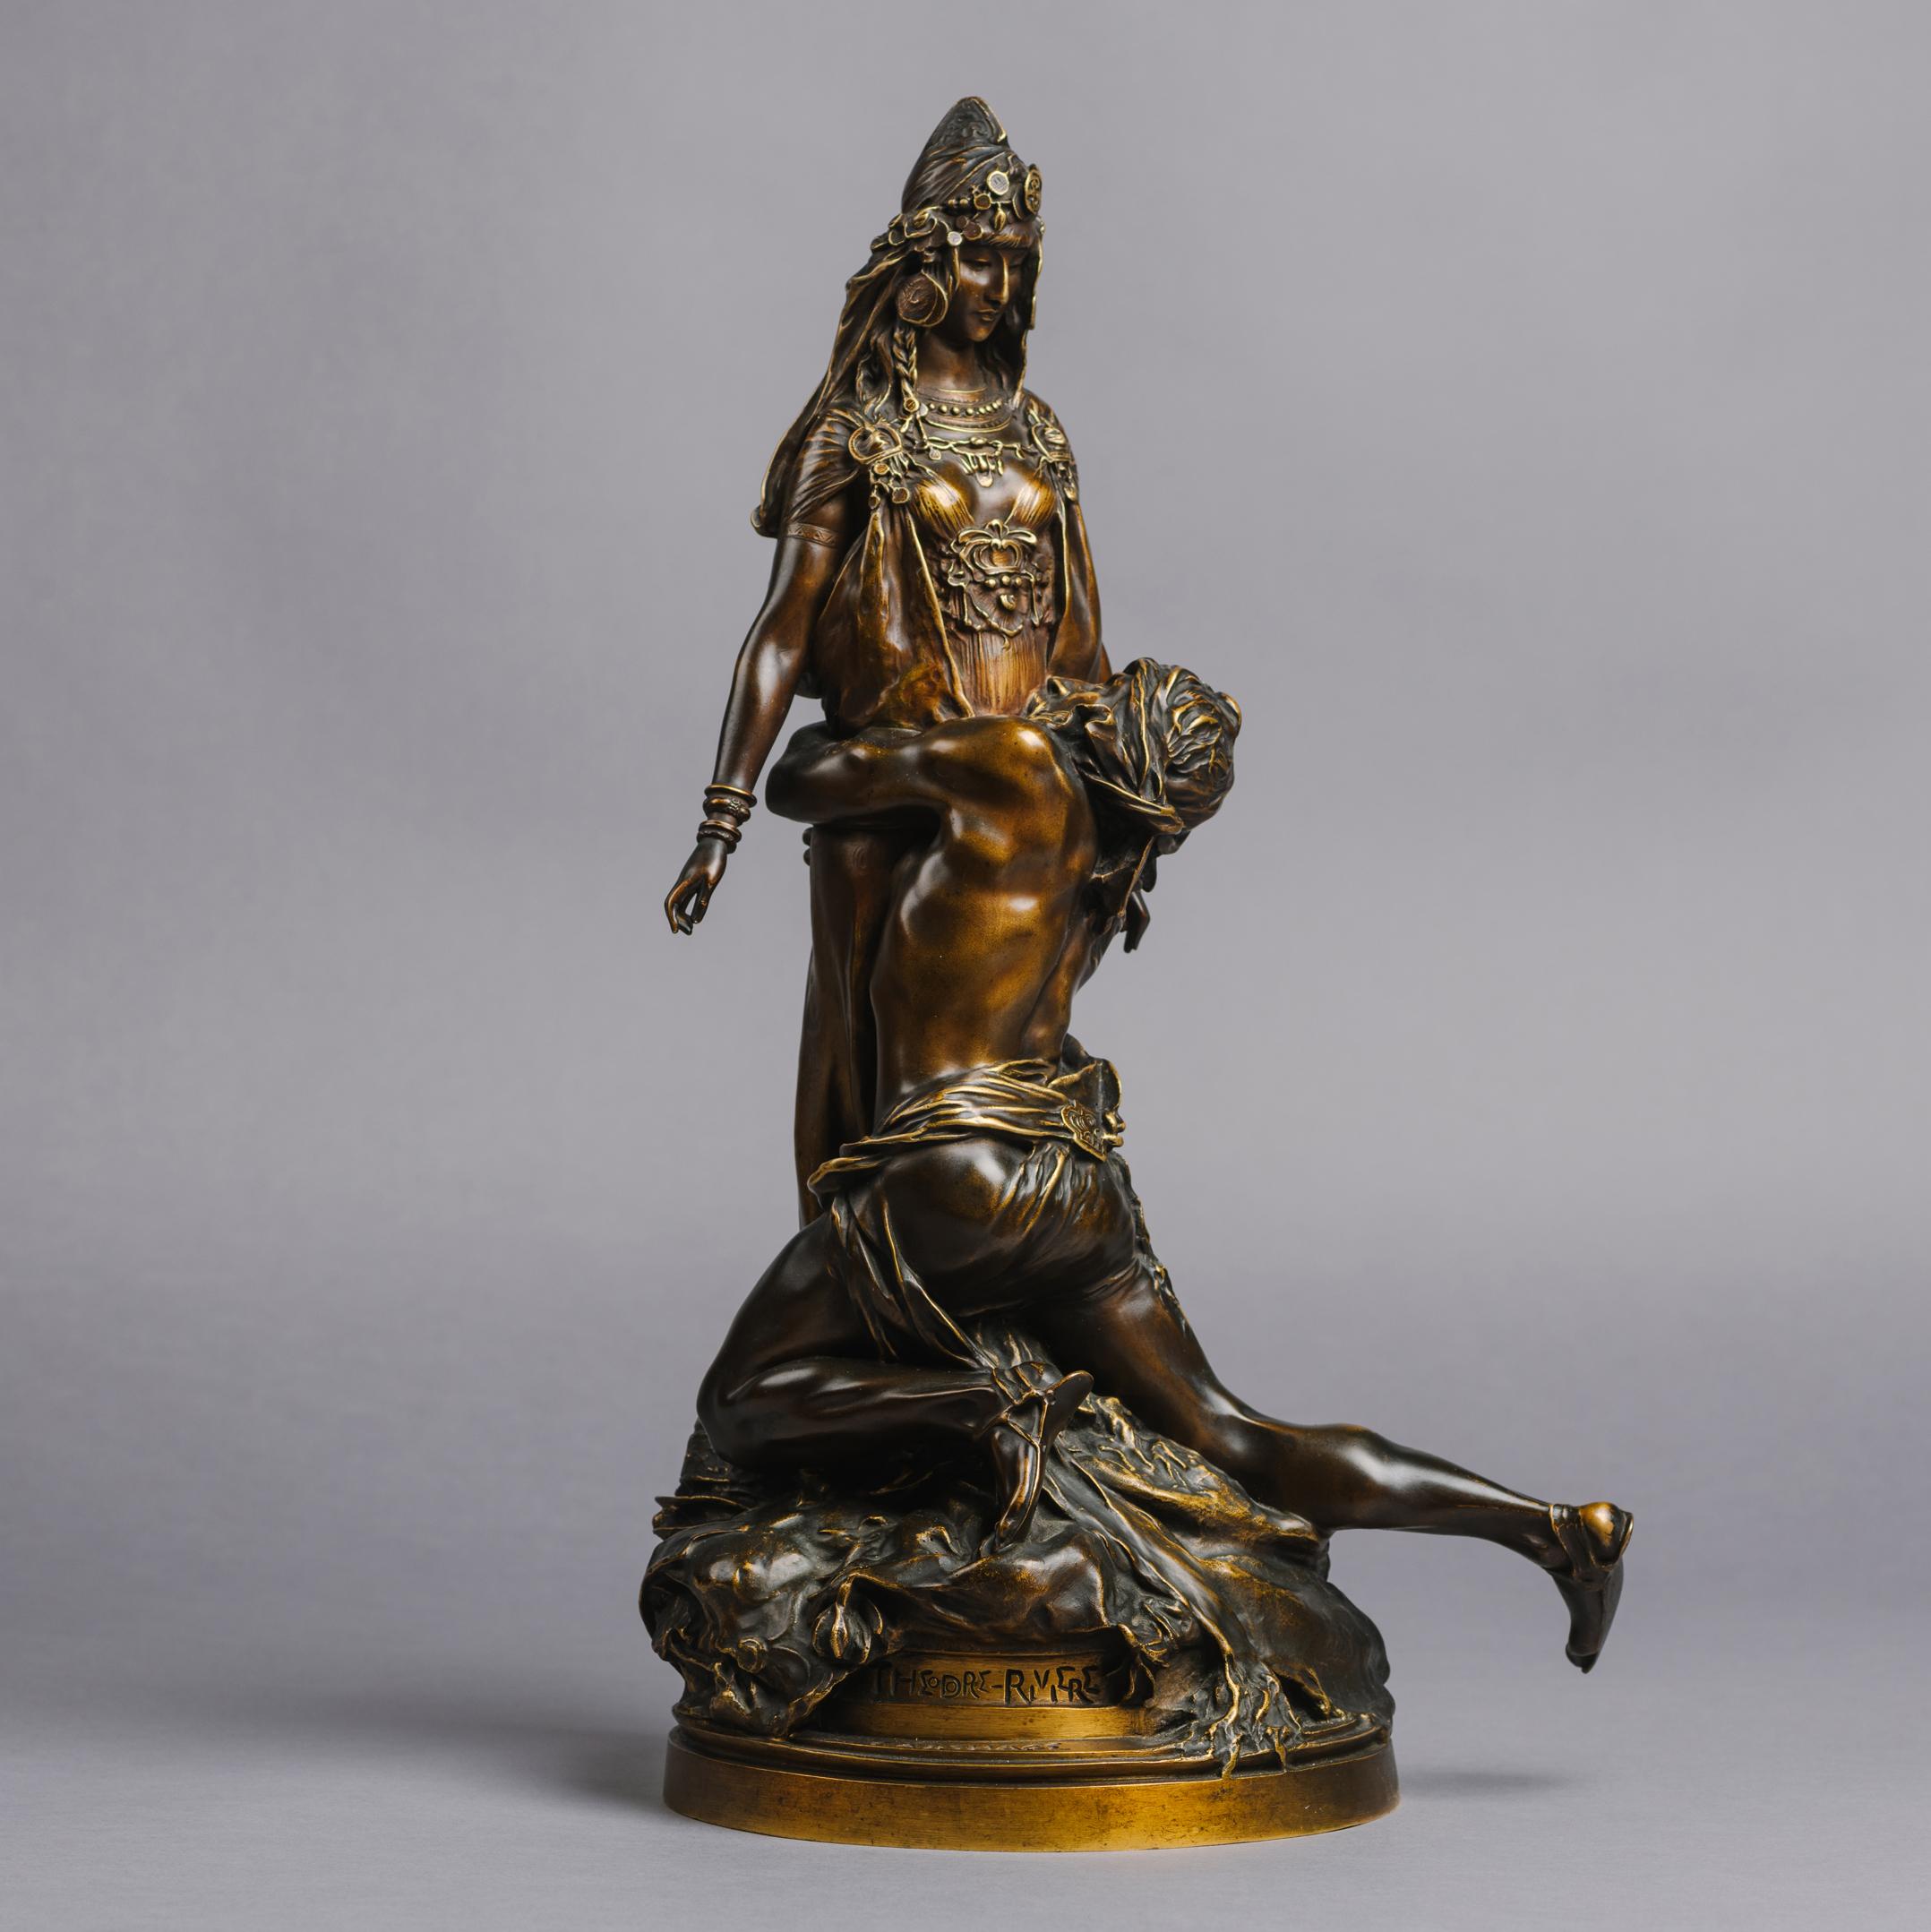 A 19th century French bronze group ‘Carthage’ by Theodore Riviere, cast by Susse Frères.

Signed ‘THEODORE-RIVIERE’ and titled 